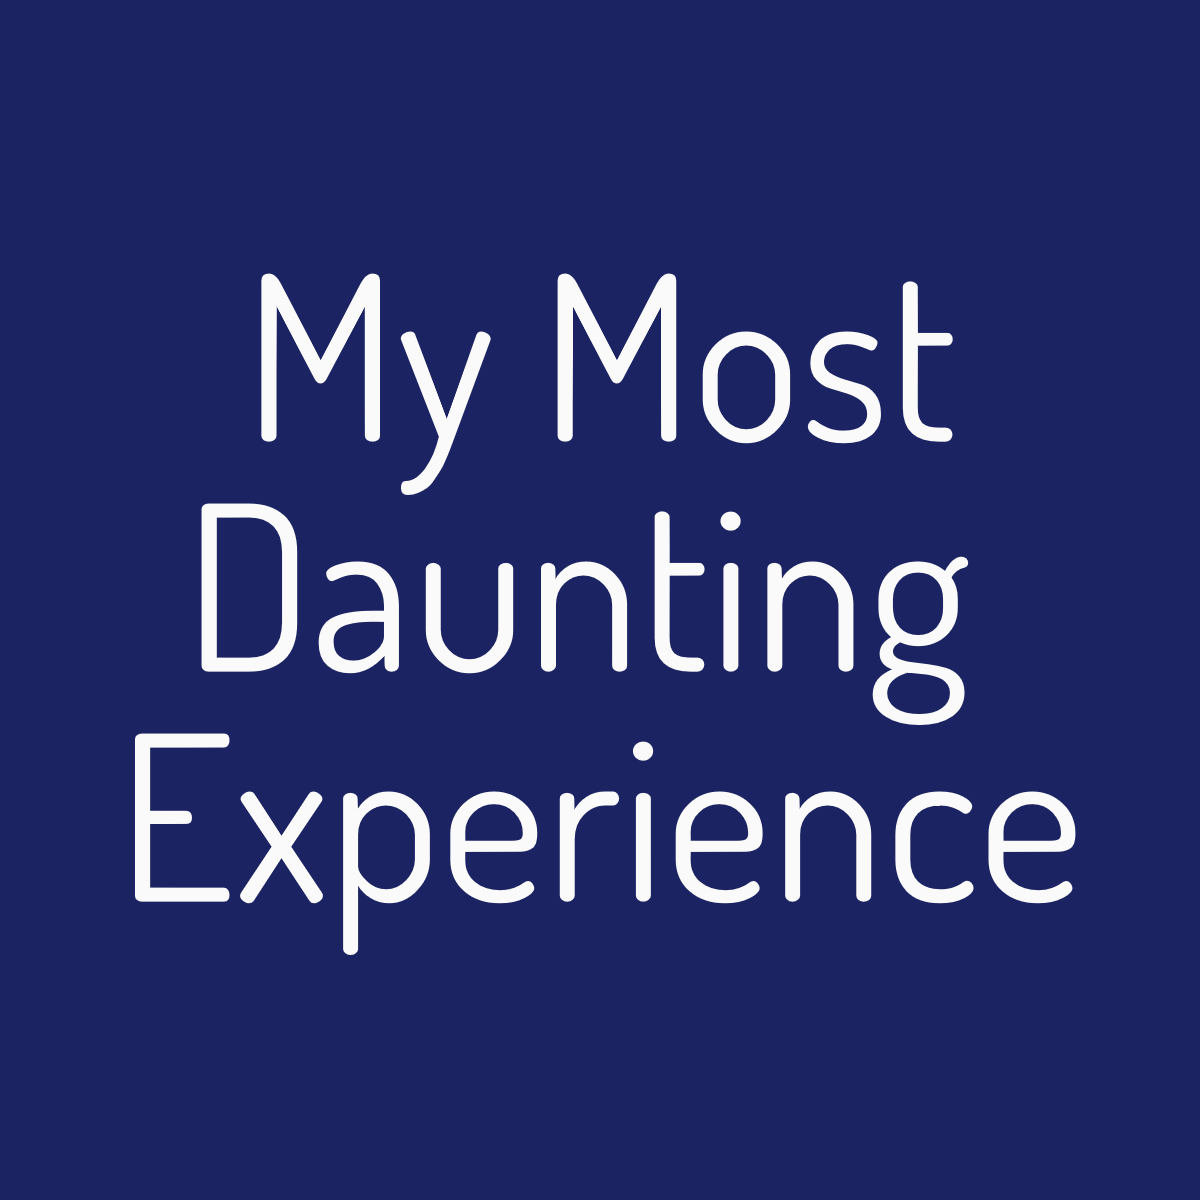 My Most Daunting Experience Design 